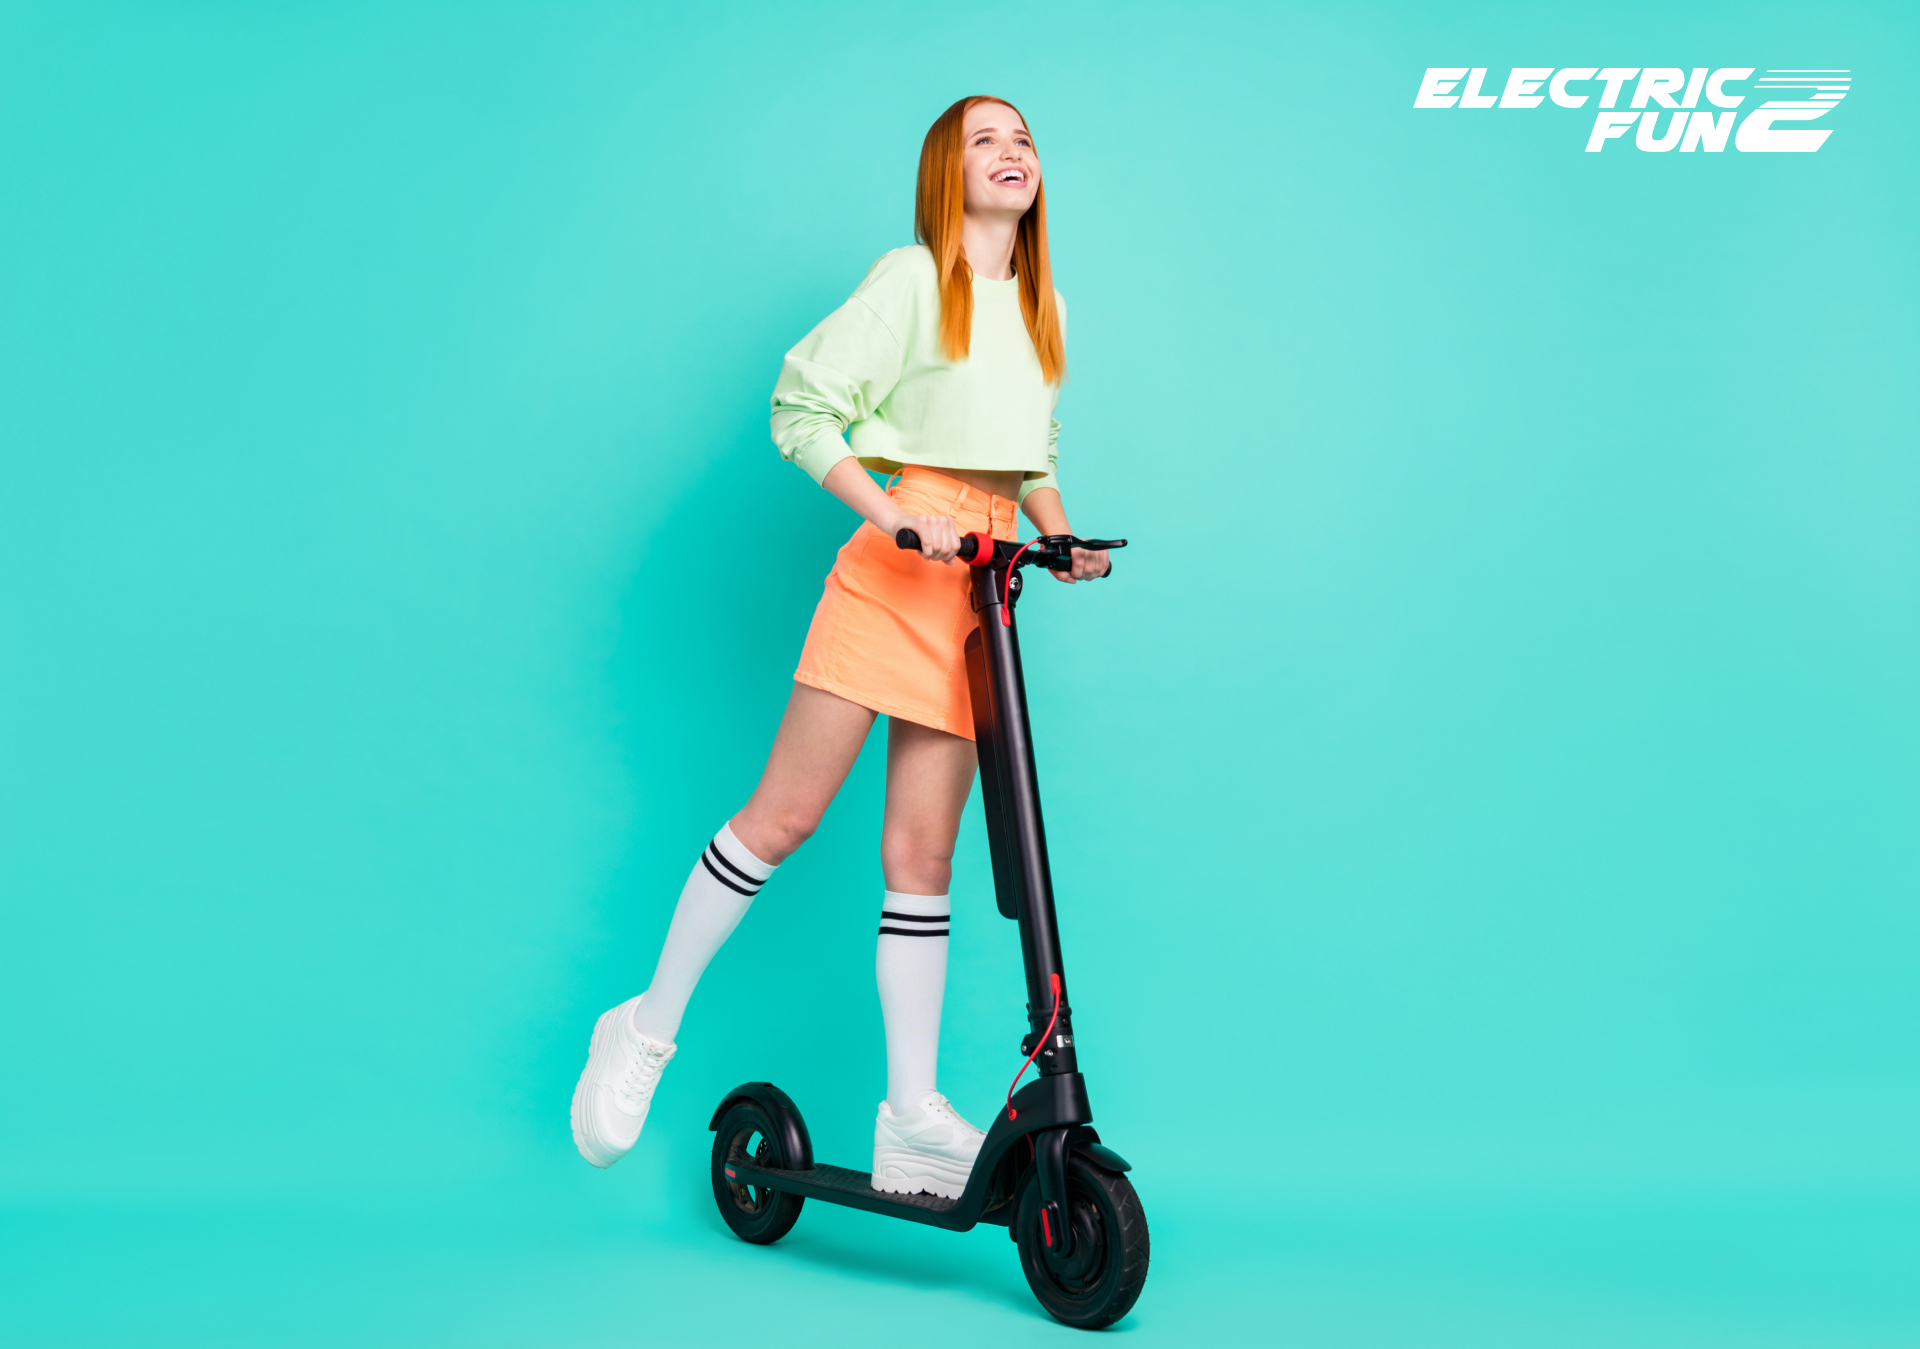 electric fun scooter, fun electric scooter, best electric scooter for fun